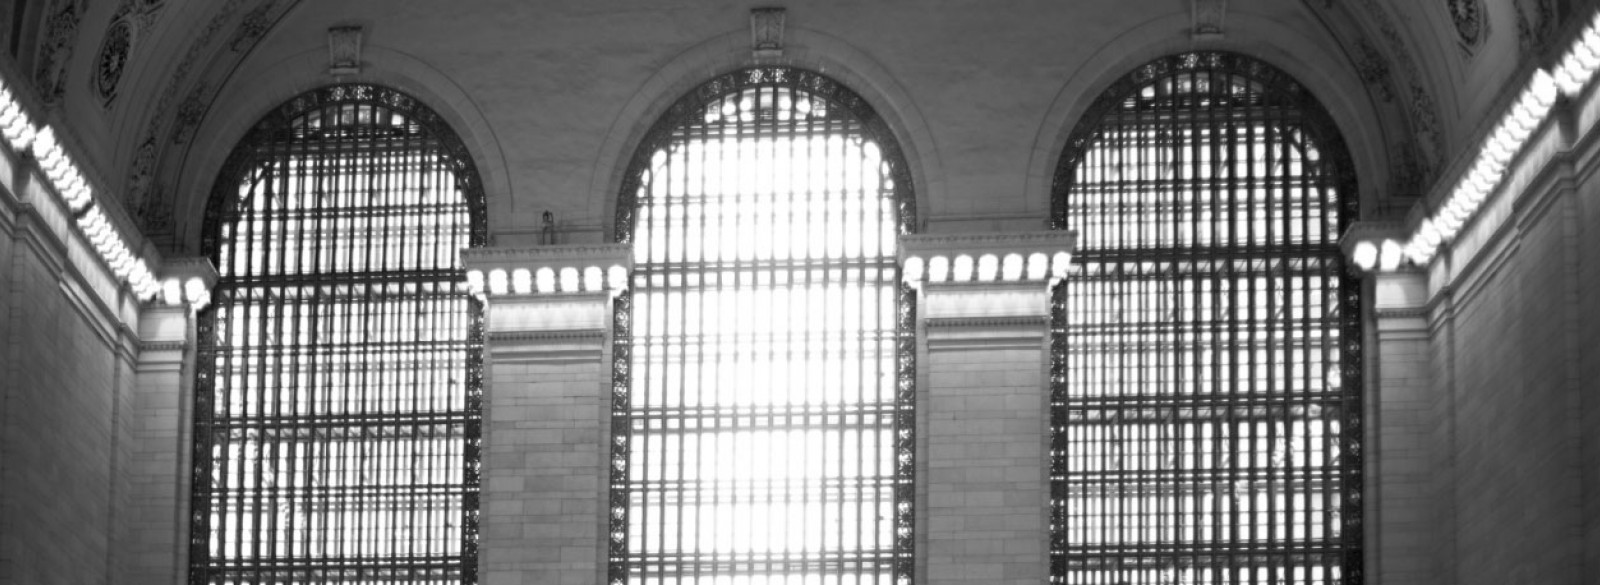 Interior photo of windows in Grand Central Terminal N.Y.C.